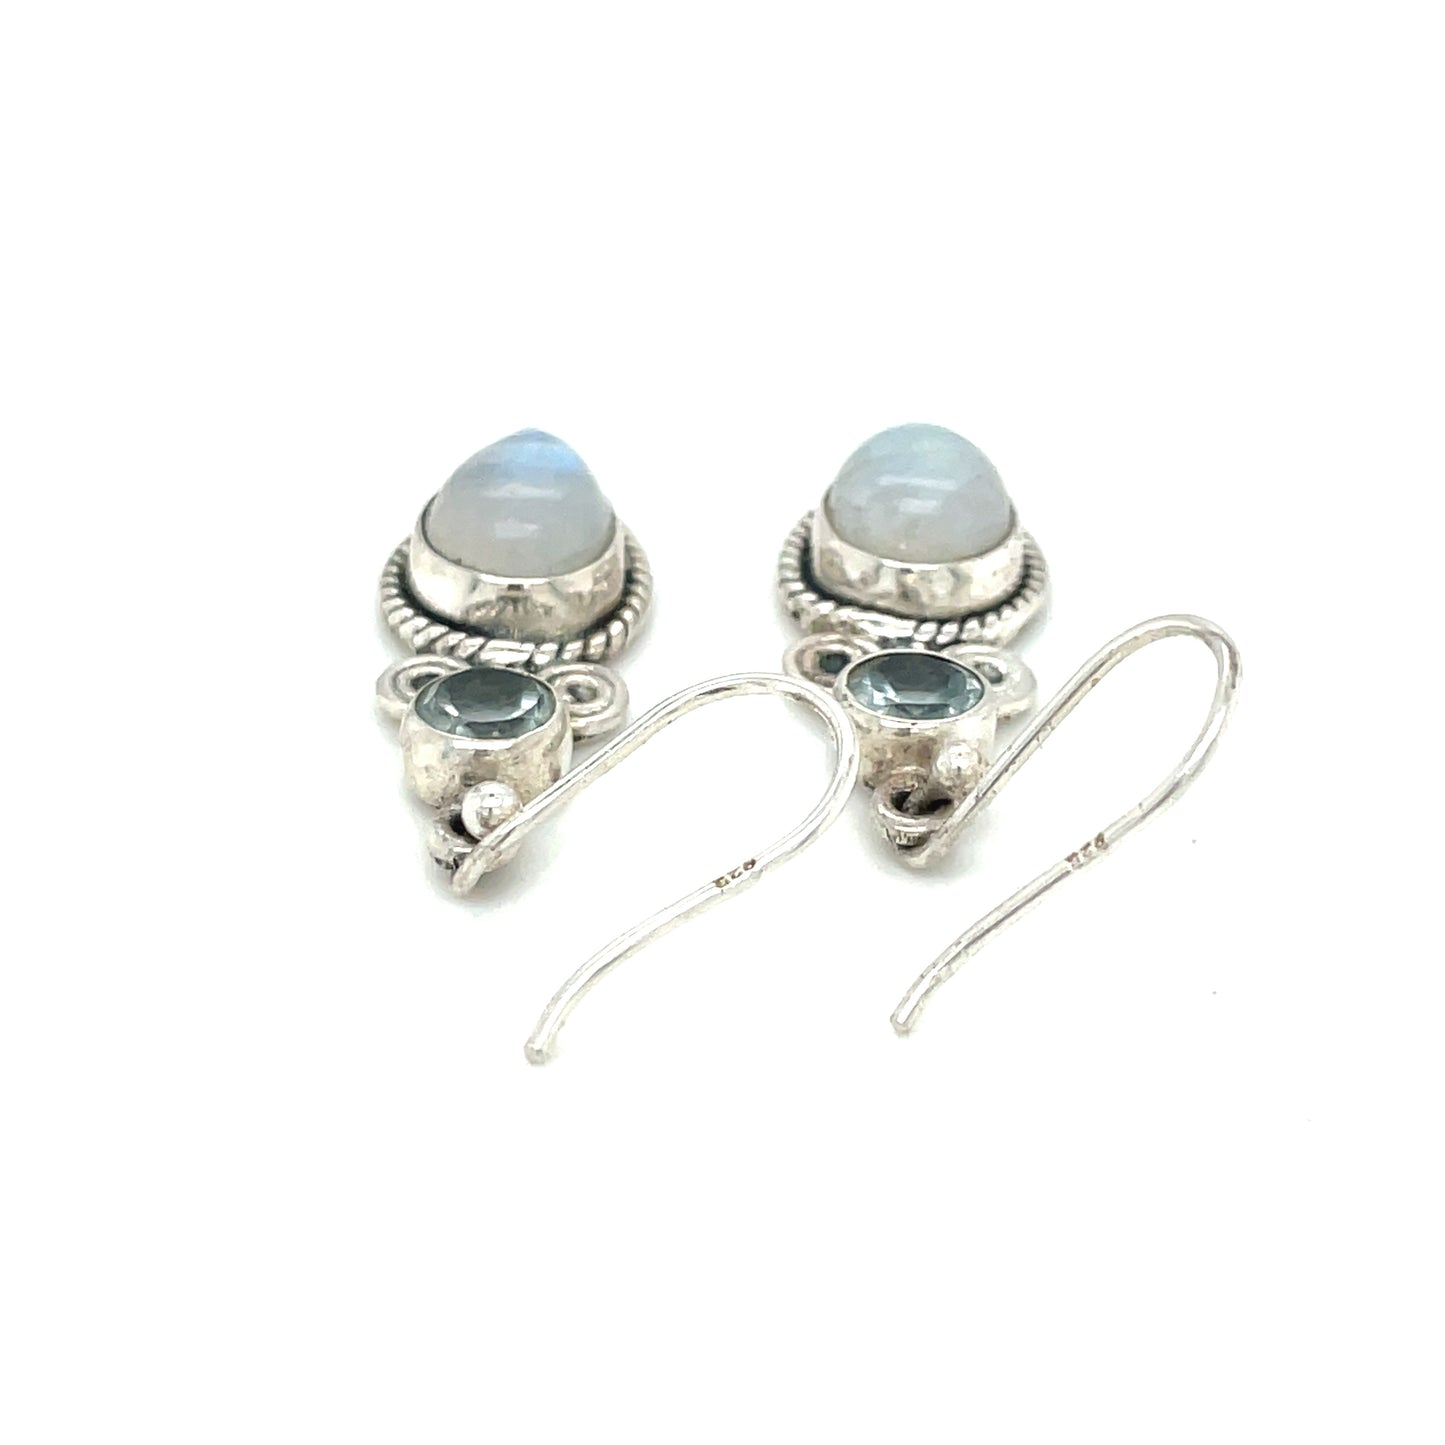 Sterling Silver and Topaz Earrings India 4.6 Grams